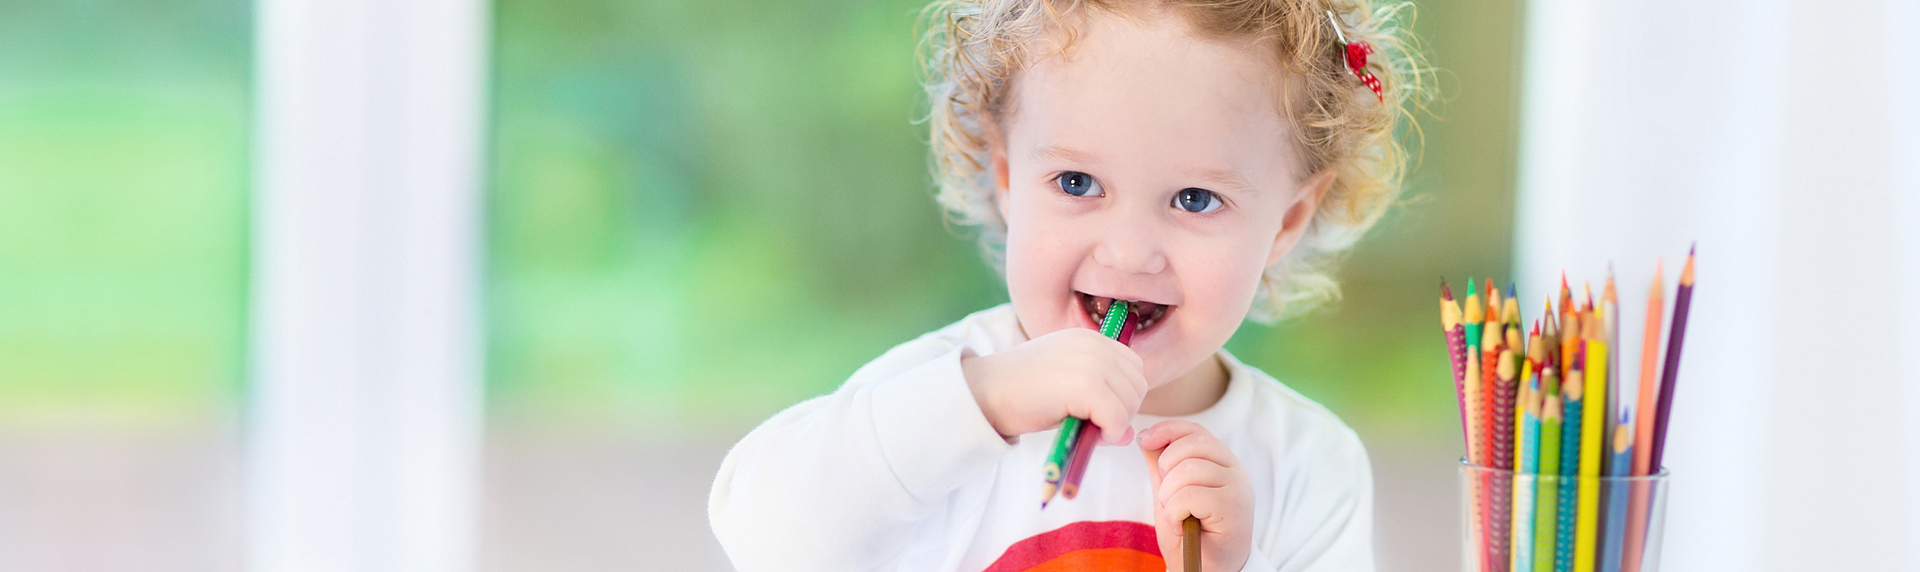 Cute baby biting colorful pencils